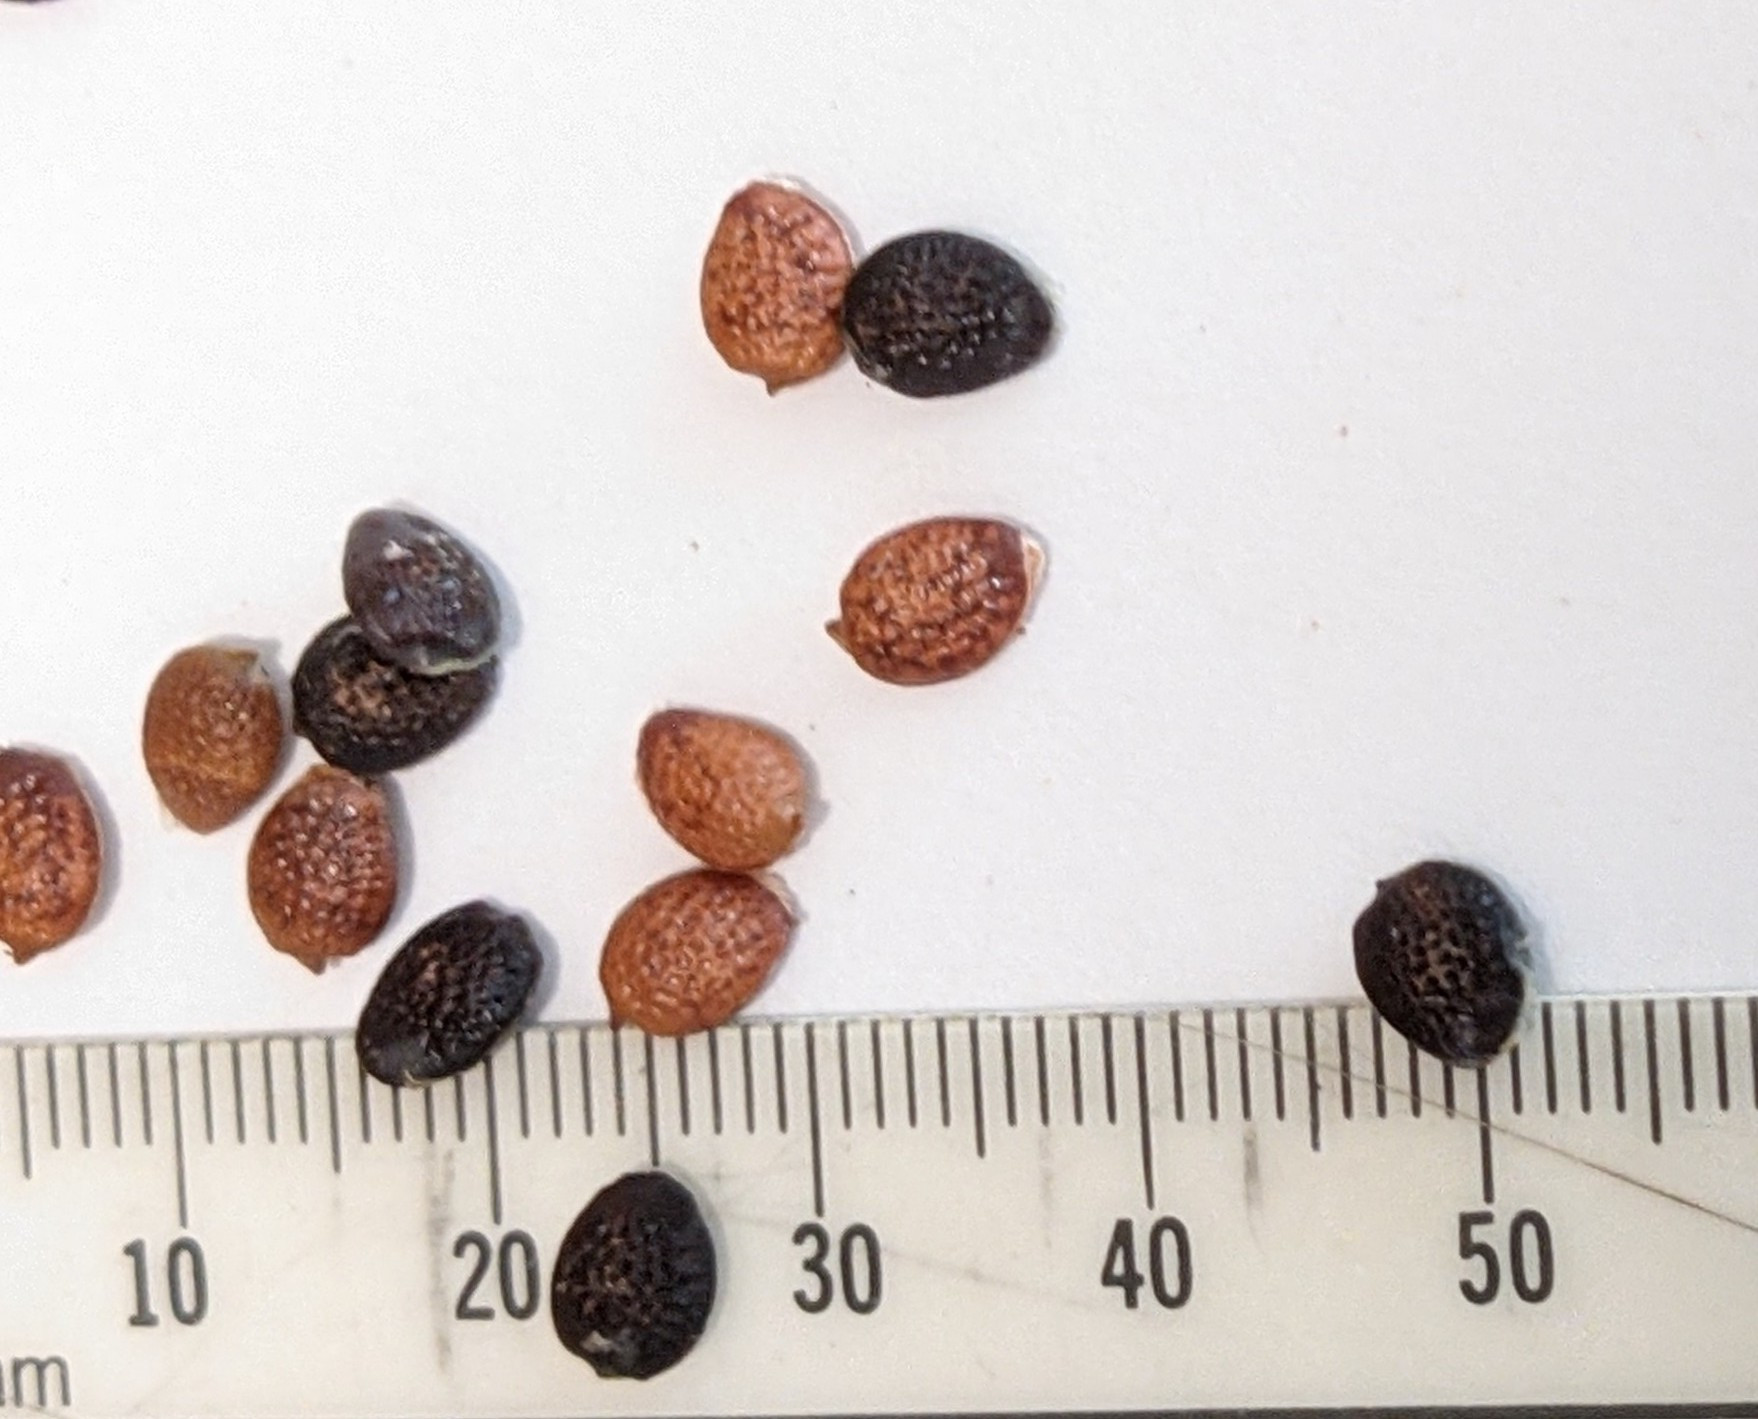 The Scientific Name is Passiflora incarnata. You will likely hear them called Purple Passionflower, Passion-vine, Maypops. This picture shows the Cleaned seeds with arils removed. of Passiflora incarnata